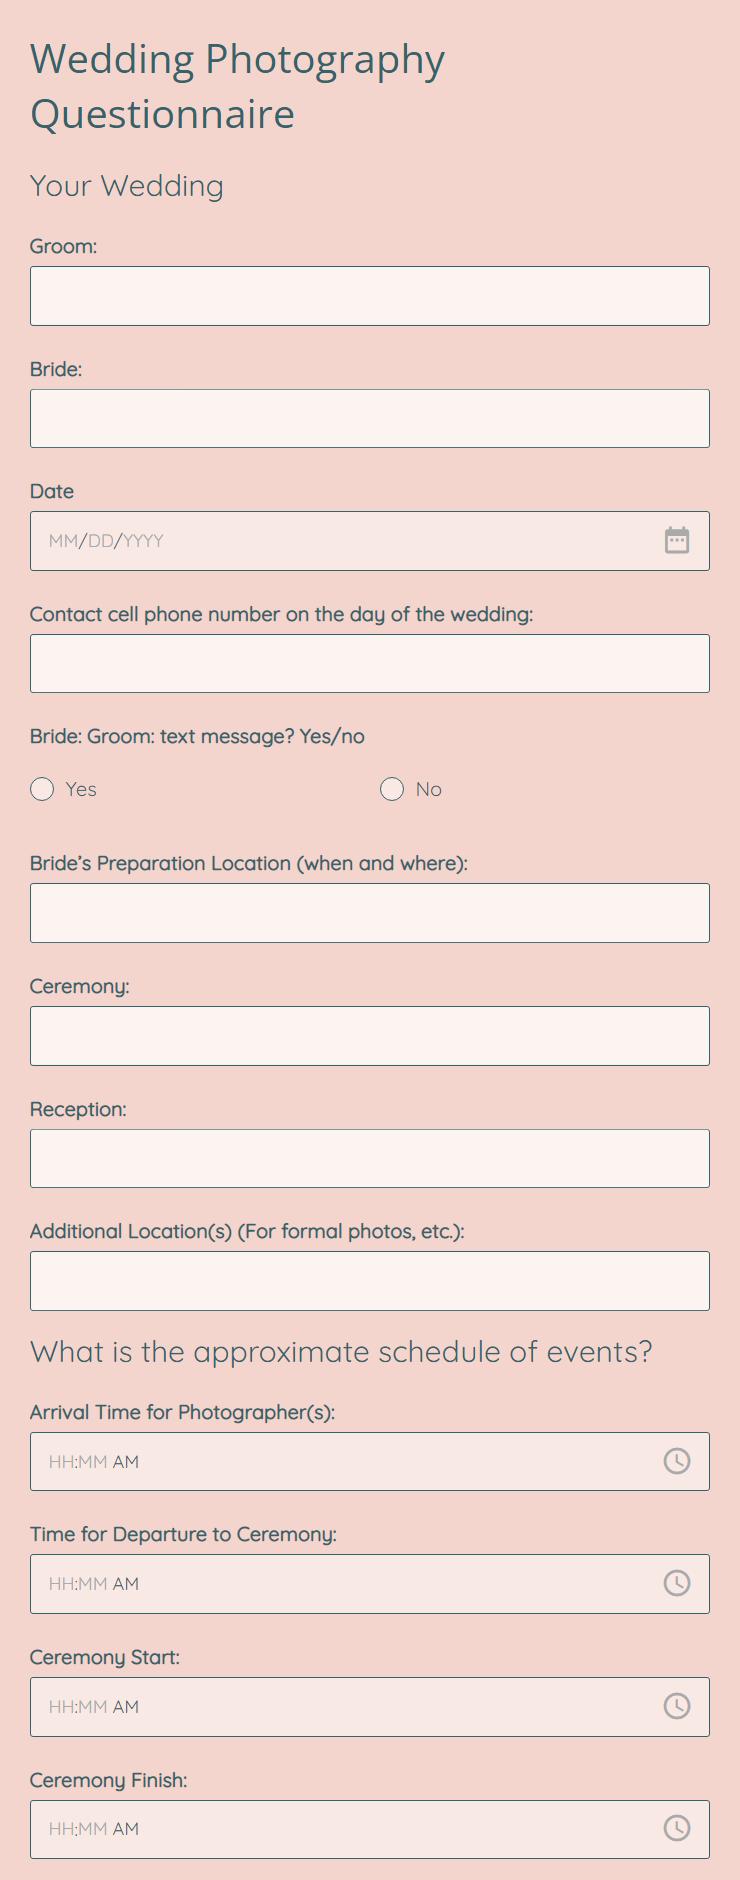 wedding-photography-questionnaire-template-123formbuilder